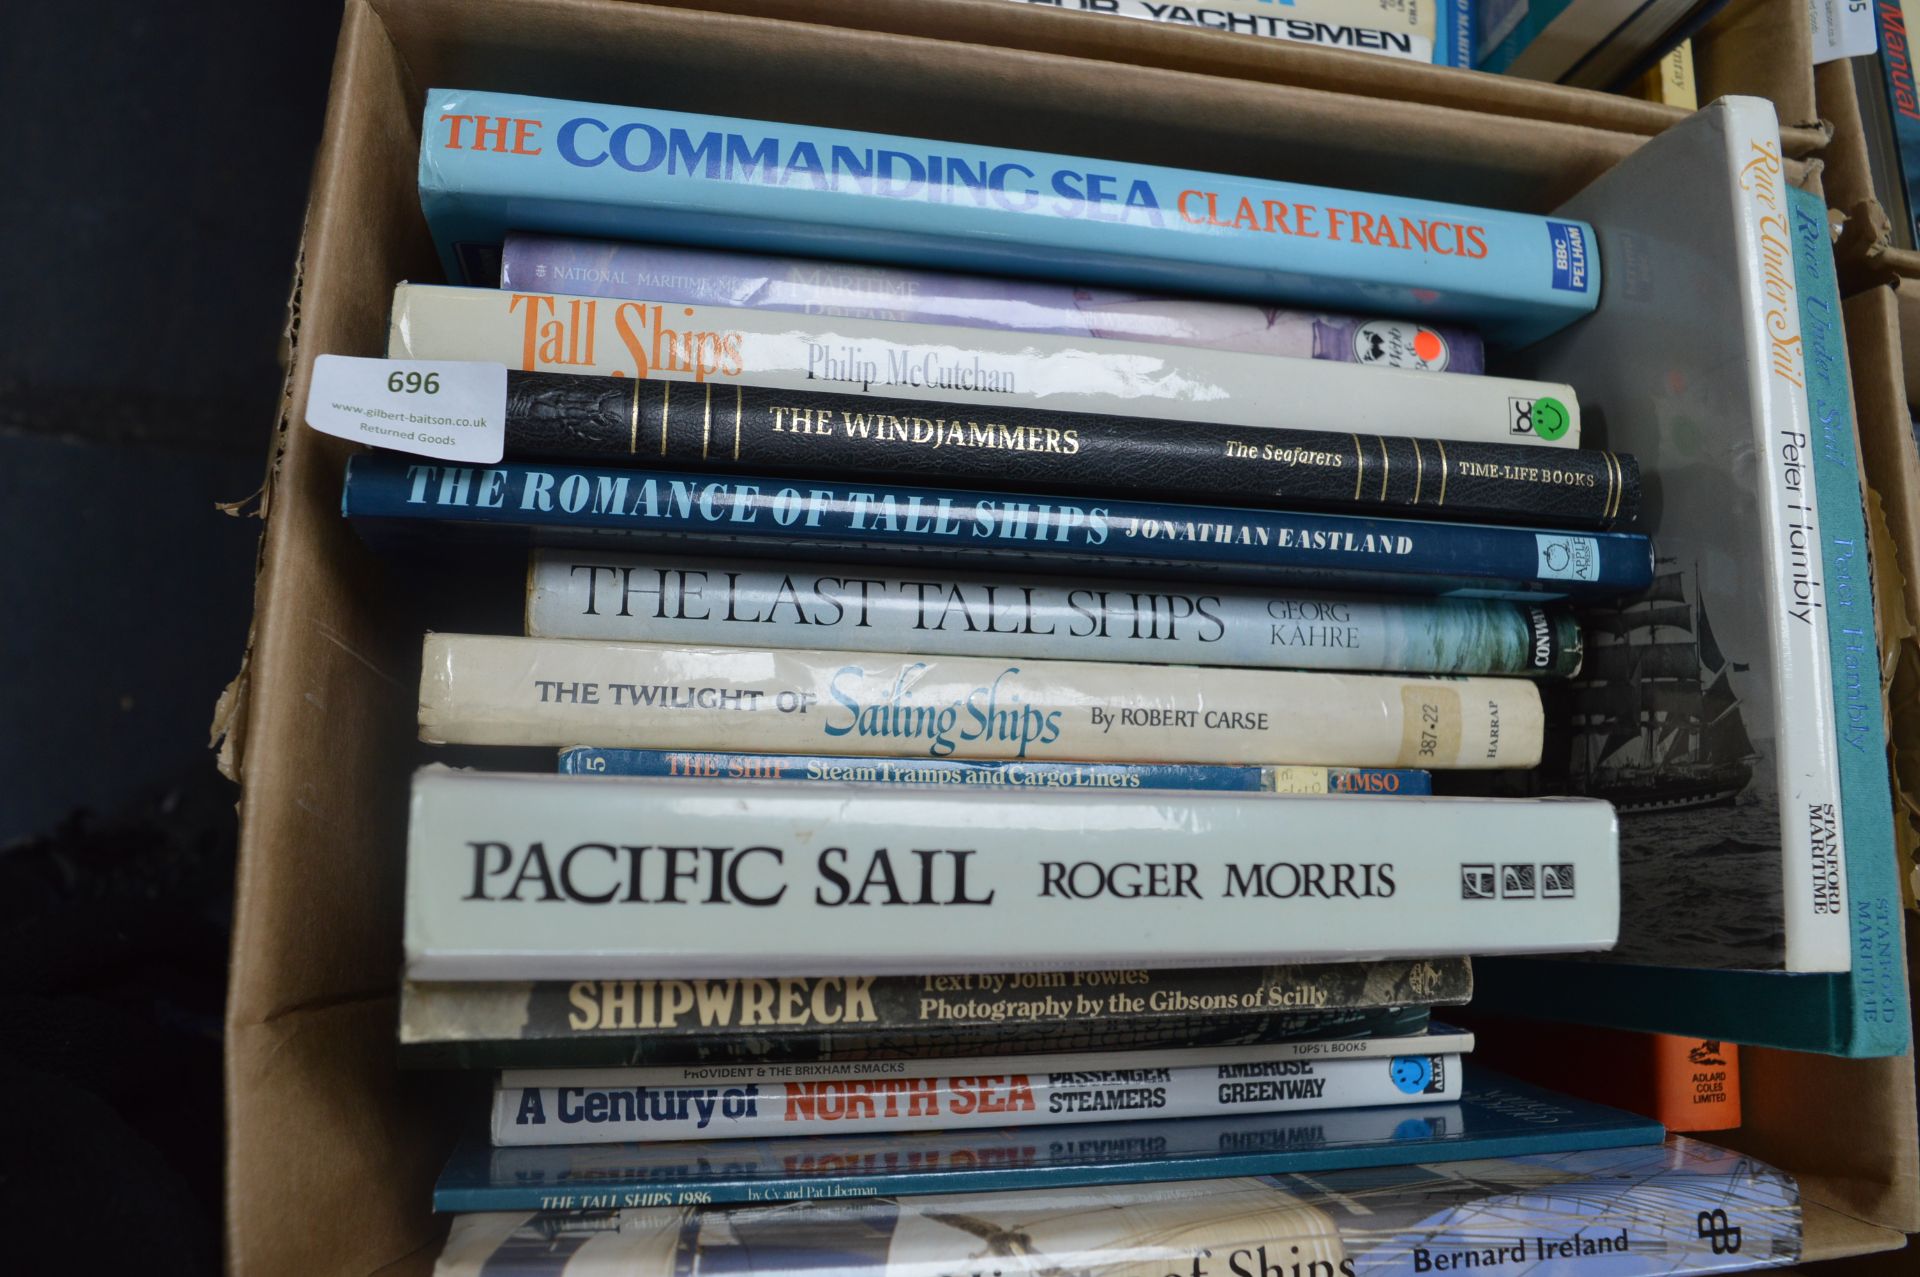 Tall Ships and Other Books